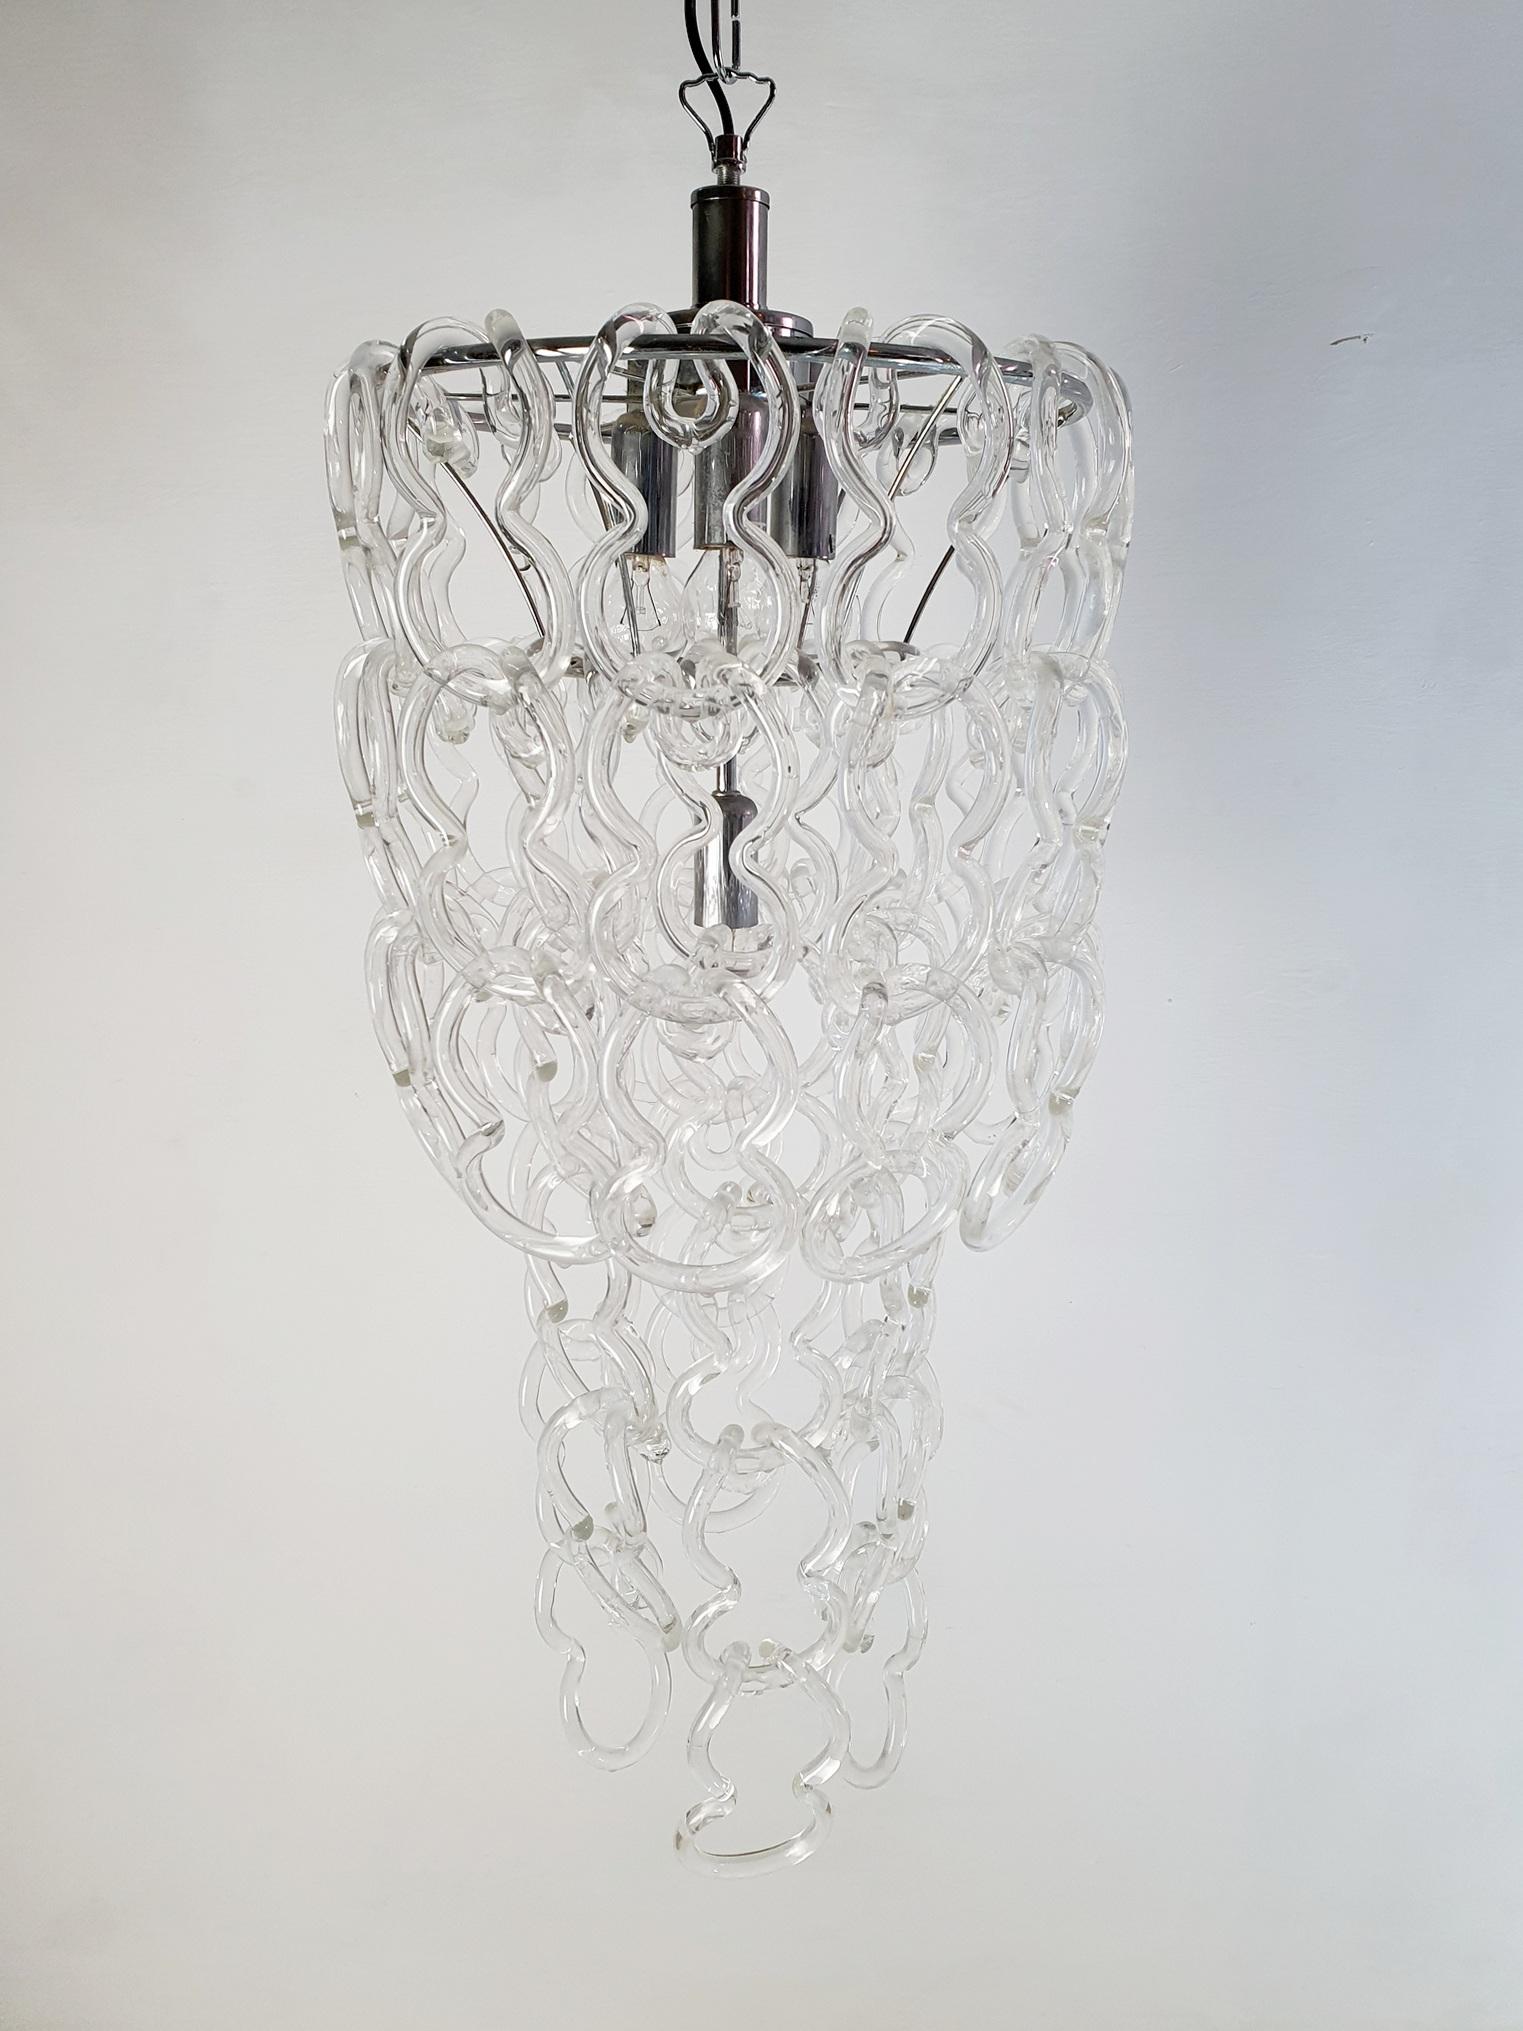 An original Giogali chandelier by Angelo Mangiarotti for Vistosi with Murano glass hanging from a chrome structure. The glass pieces can be hung a bit differently creating different heights for the chandelier. The height in this manner of the actual